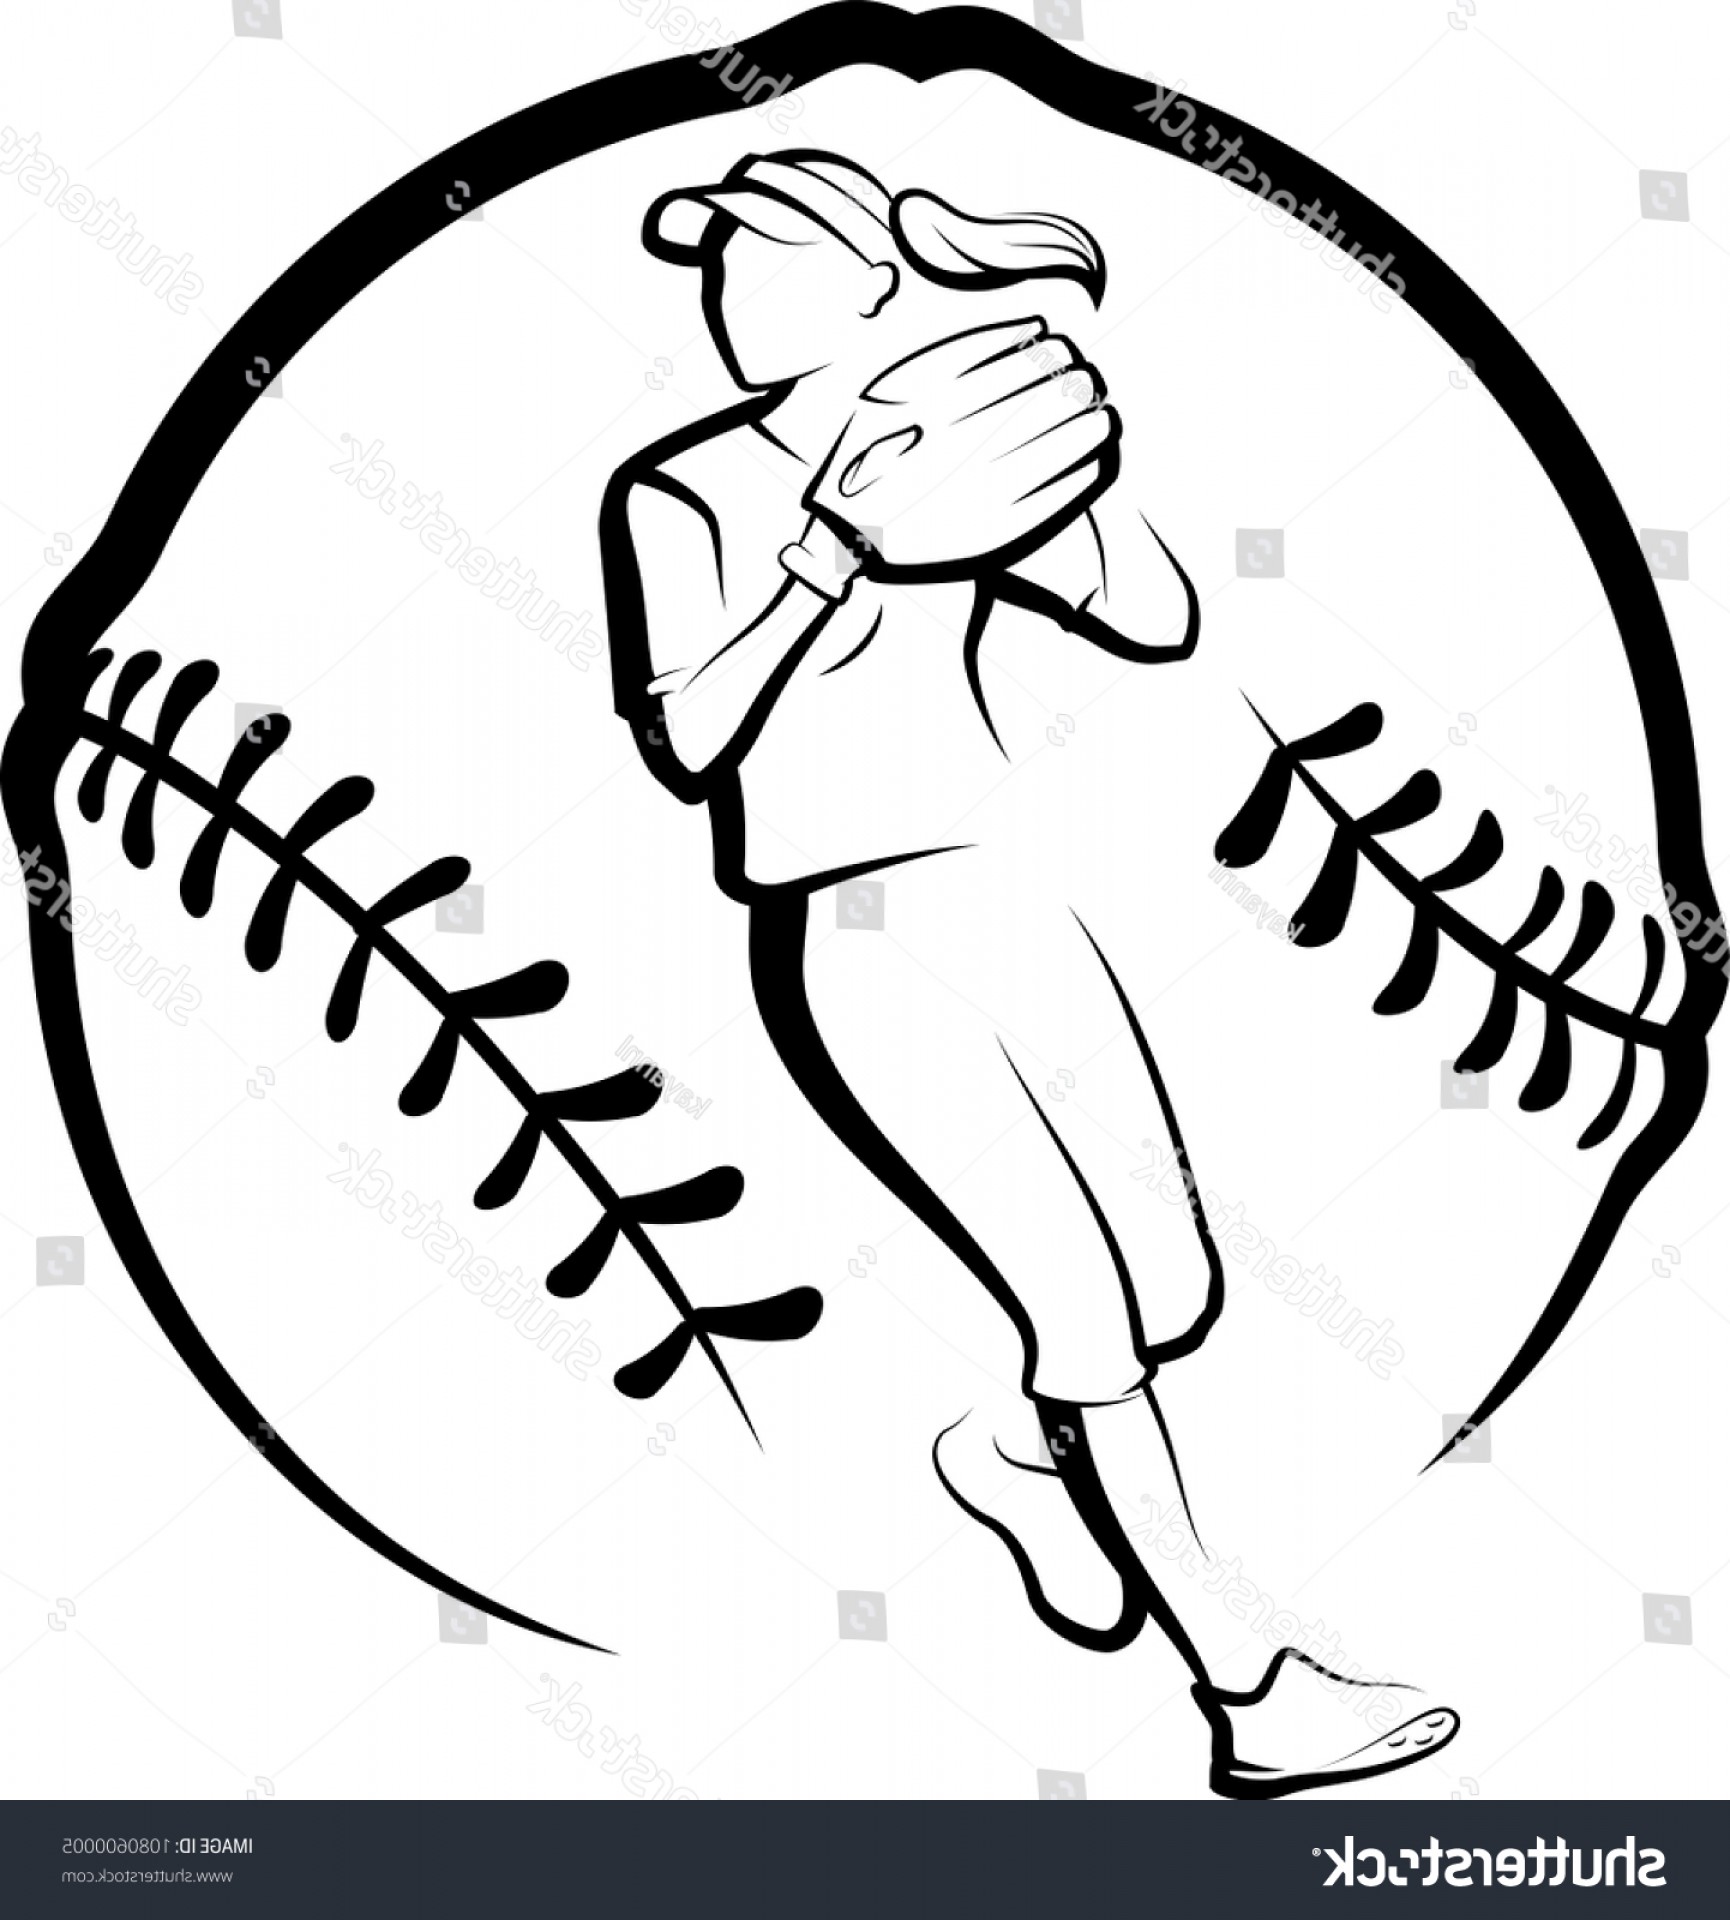 How To Draw A Softball Softball Player Drawing At